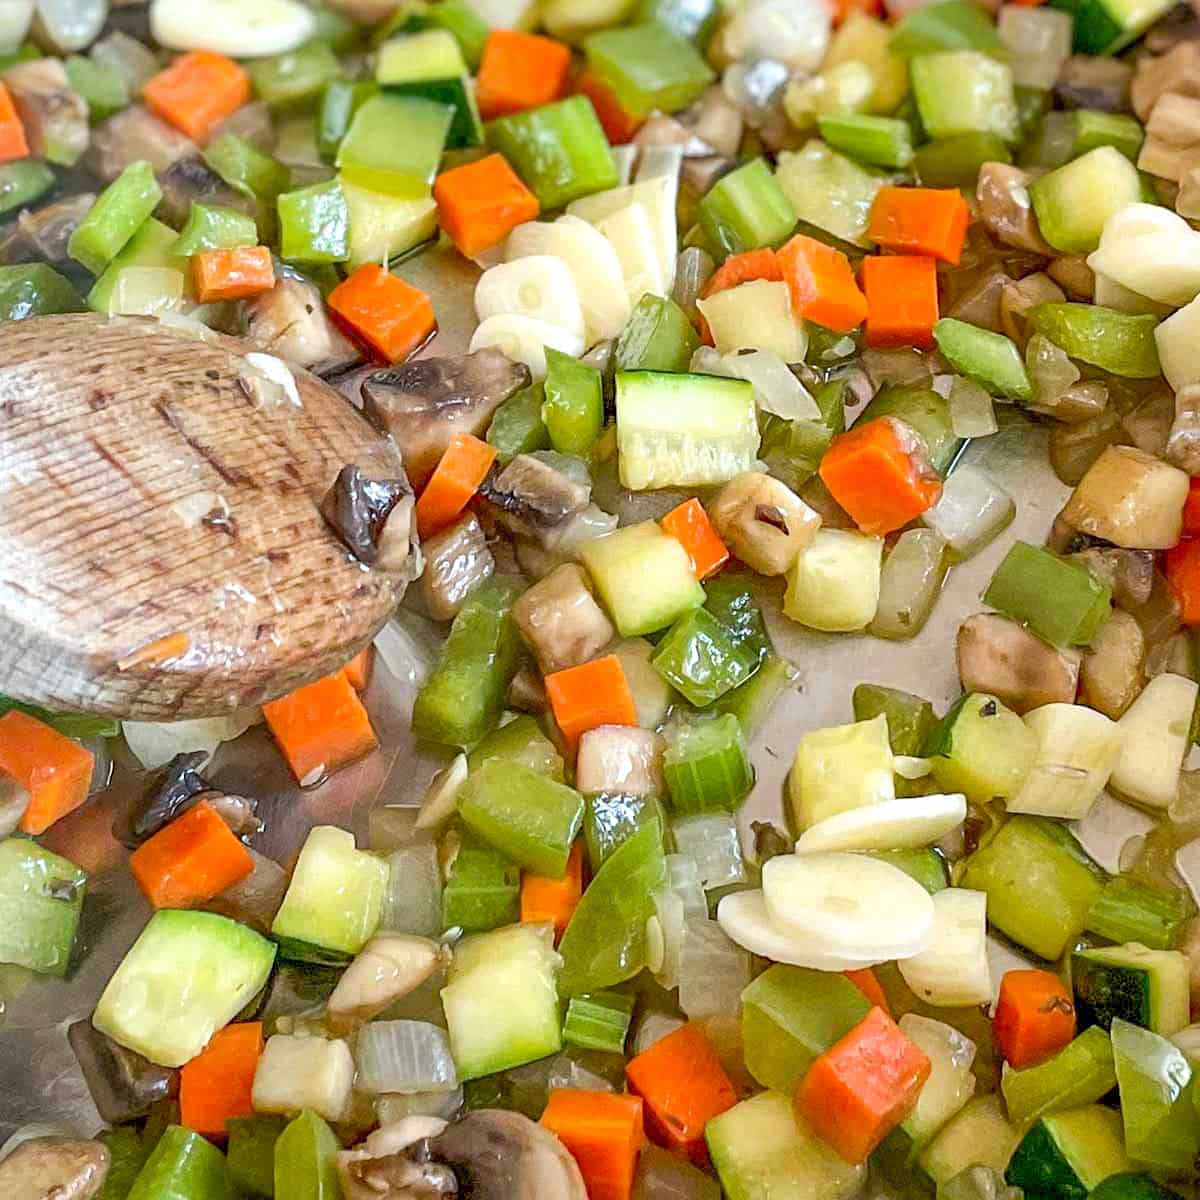 Garlic is added to the vegetables sweating in the pan.